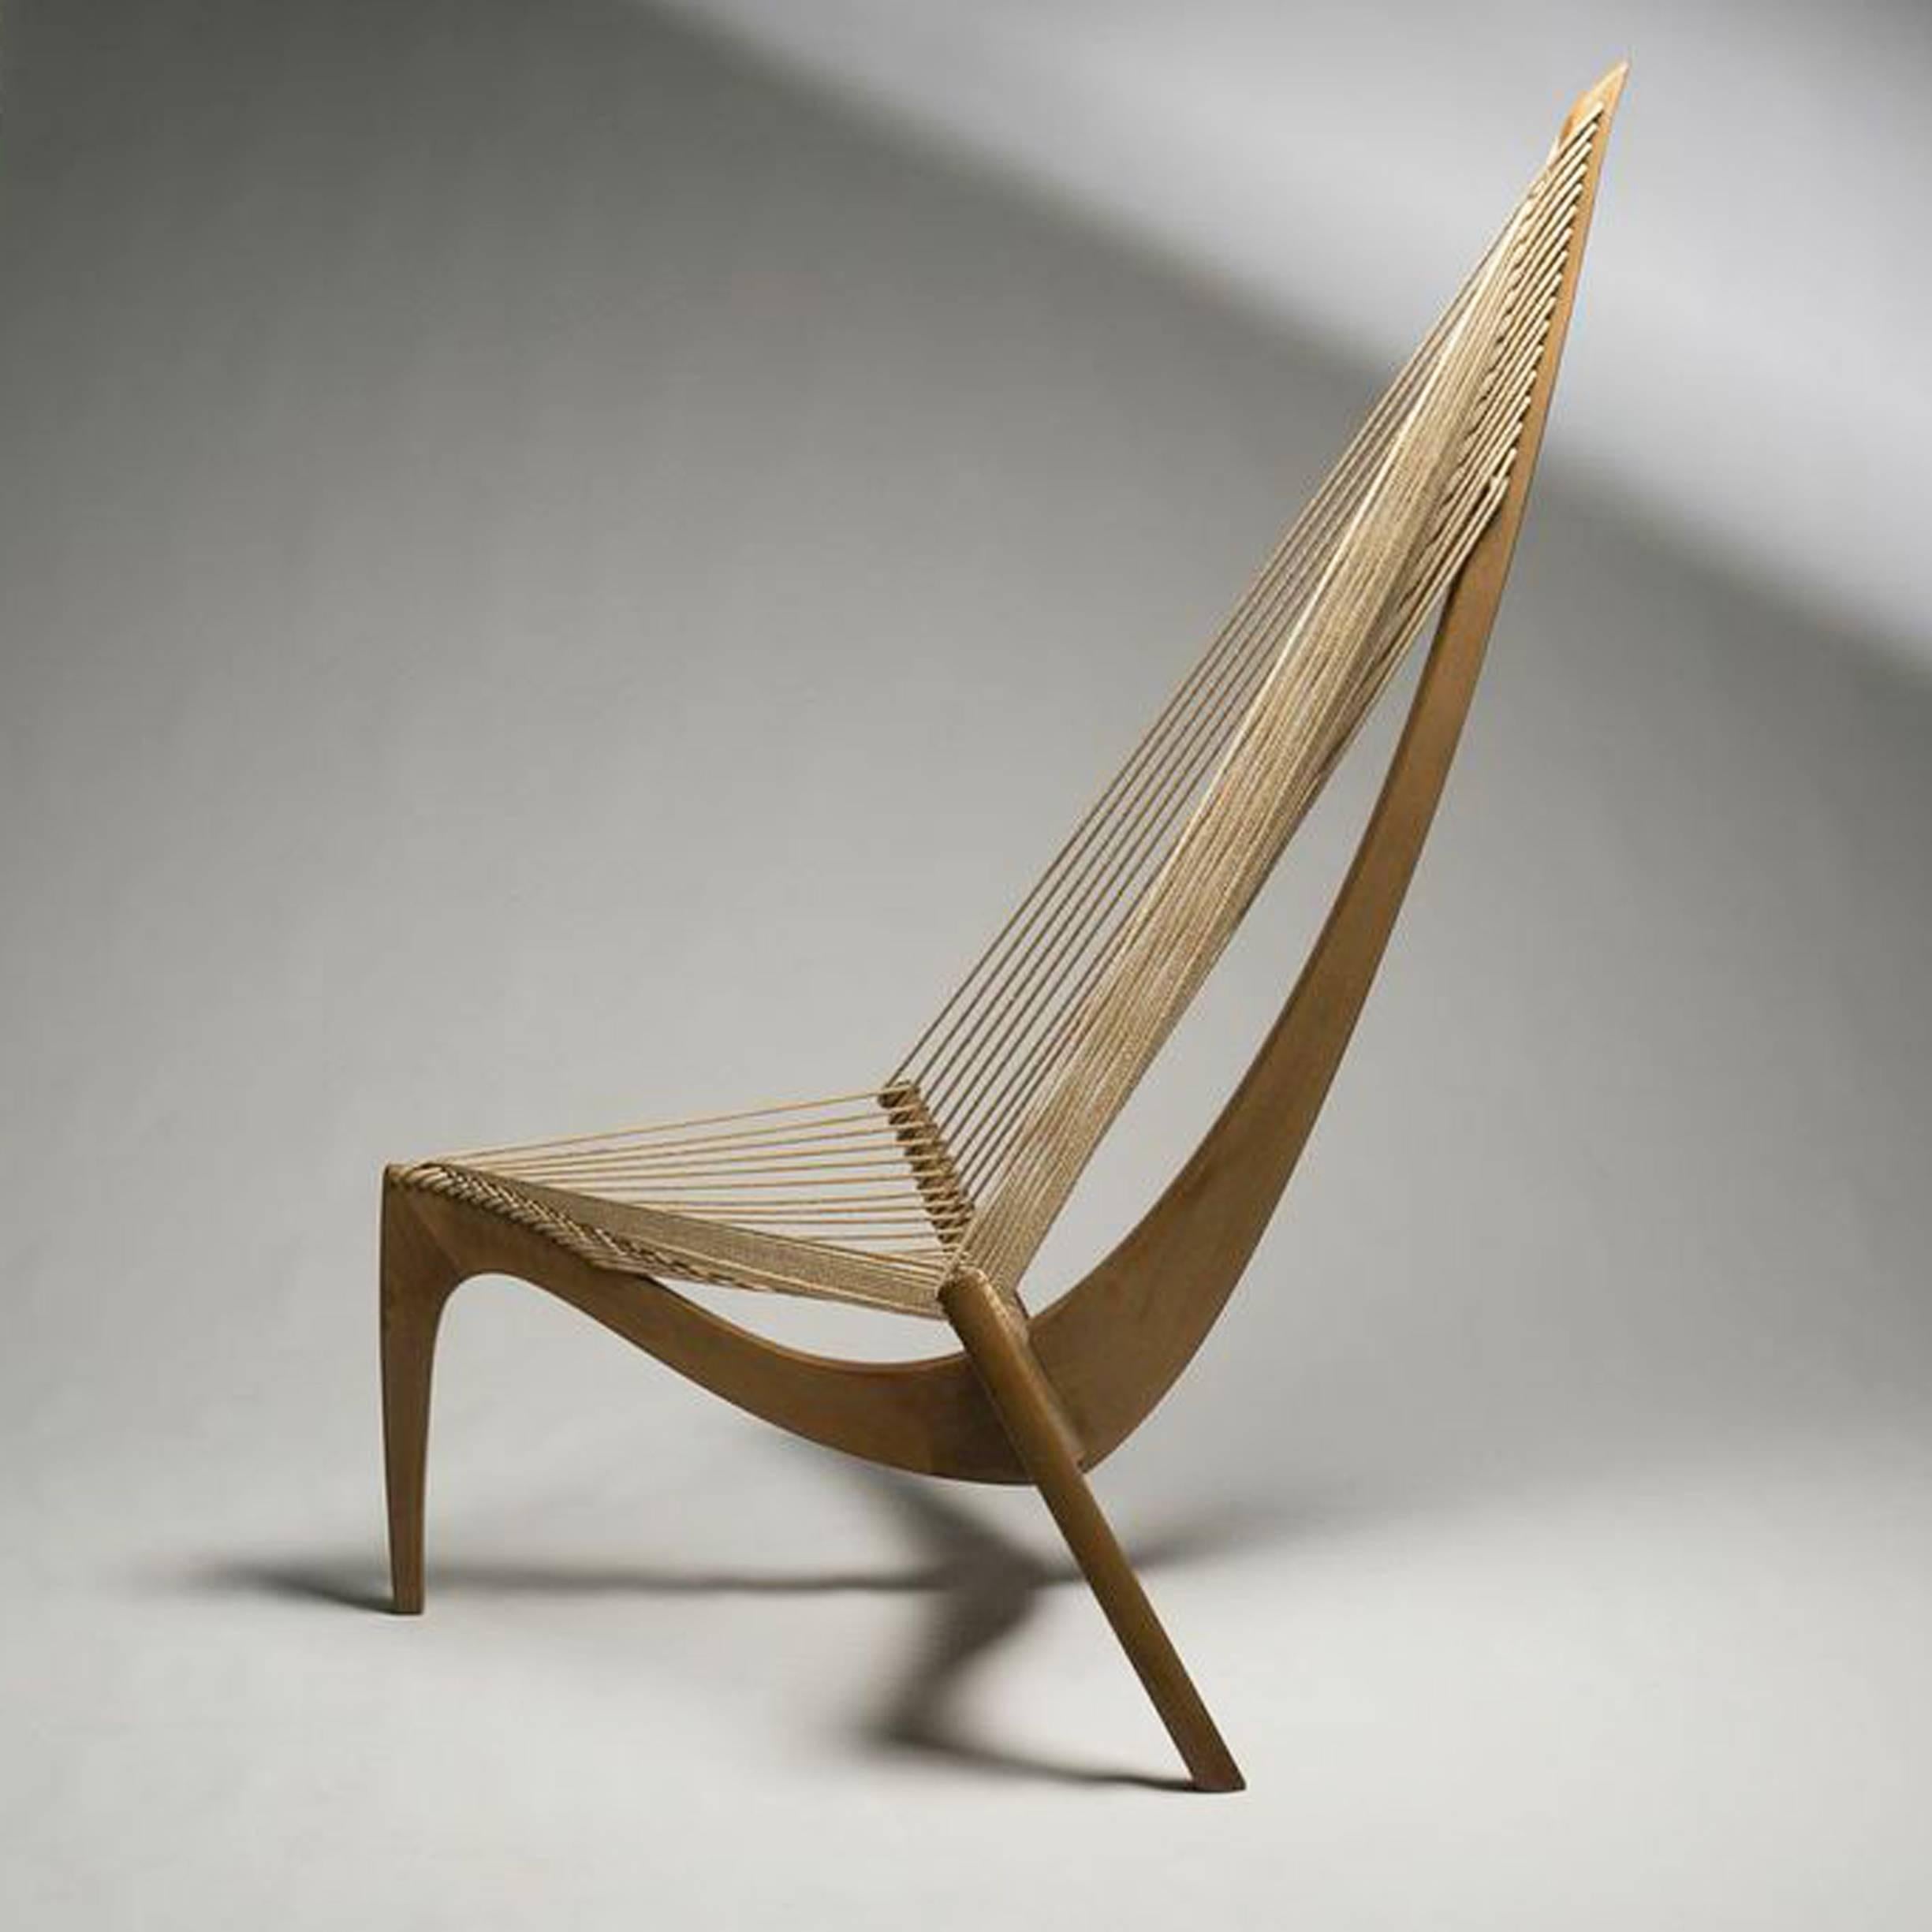 The striking appearance of the Harp Chair was inspired and based on the bow section and hallyard of a Viking ship. The idea behind it was to create a cultural object that was enjoyable and comfortable to sit in while giving a pleasing design for the